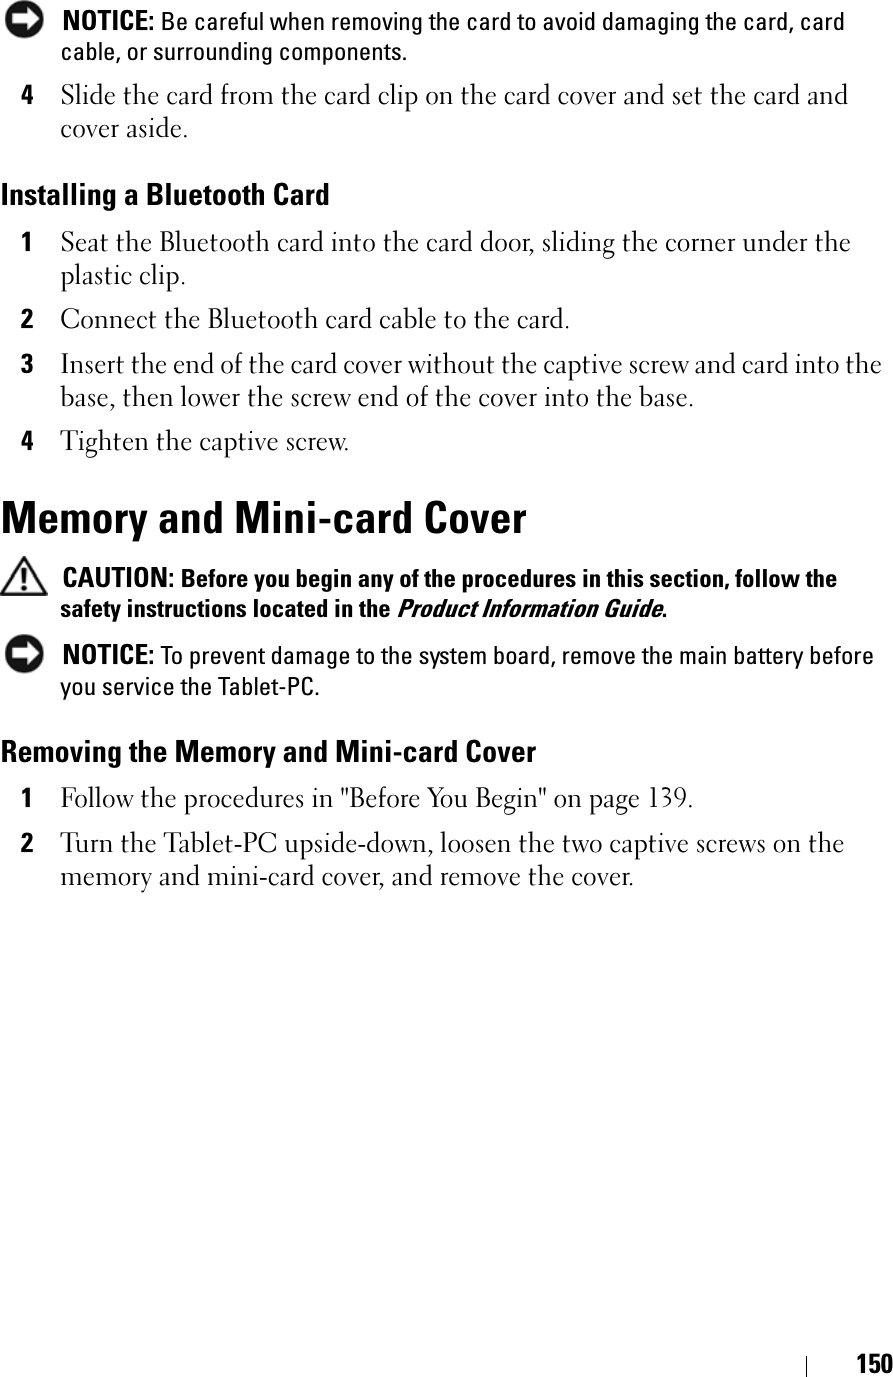 150NOTICE: Be careful when removing the card to avoid damaging the card, card cable, or surrounding components.4Slide the card from the card clip on the card cover and set the card and cover aside.Installing a Bluetooth Card1Seat the Bluetooth card into the card door, sliding the corner under the plastic clip.2Connect the Bluetooth card cable to the card.3Insert the end of the card cover without the captive screw and card into the base, then lower the screw end of the cover into the base.4Tighten the captive screw.Memory and Mini-card CoverCAUTION: Before you begin any of the procedures in this section, follow the safety instructions located in the Product Information Guide.NOTICE: To prevent damage to the system board, remove the main battery before you service the Tablet-PC. Removing the Memory and Mini-card Cover1Follow the procedures in &quot;Before You Begin&quot; on page 139.2Turn the Tablet-PC upside-down, loosen the two captive screws on the memory and mini-card cover, and remove the cover.